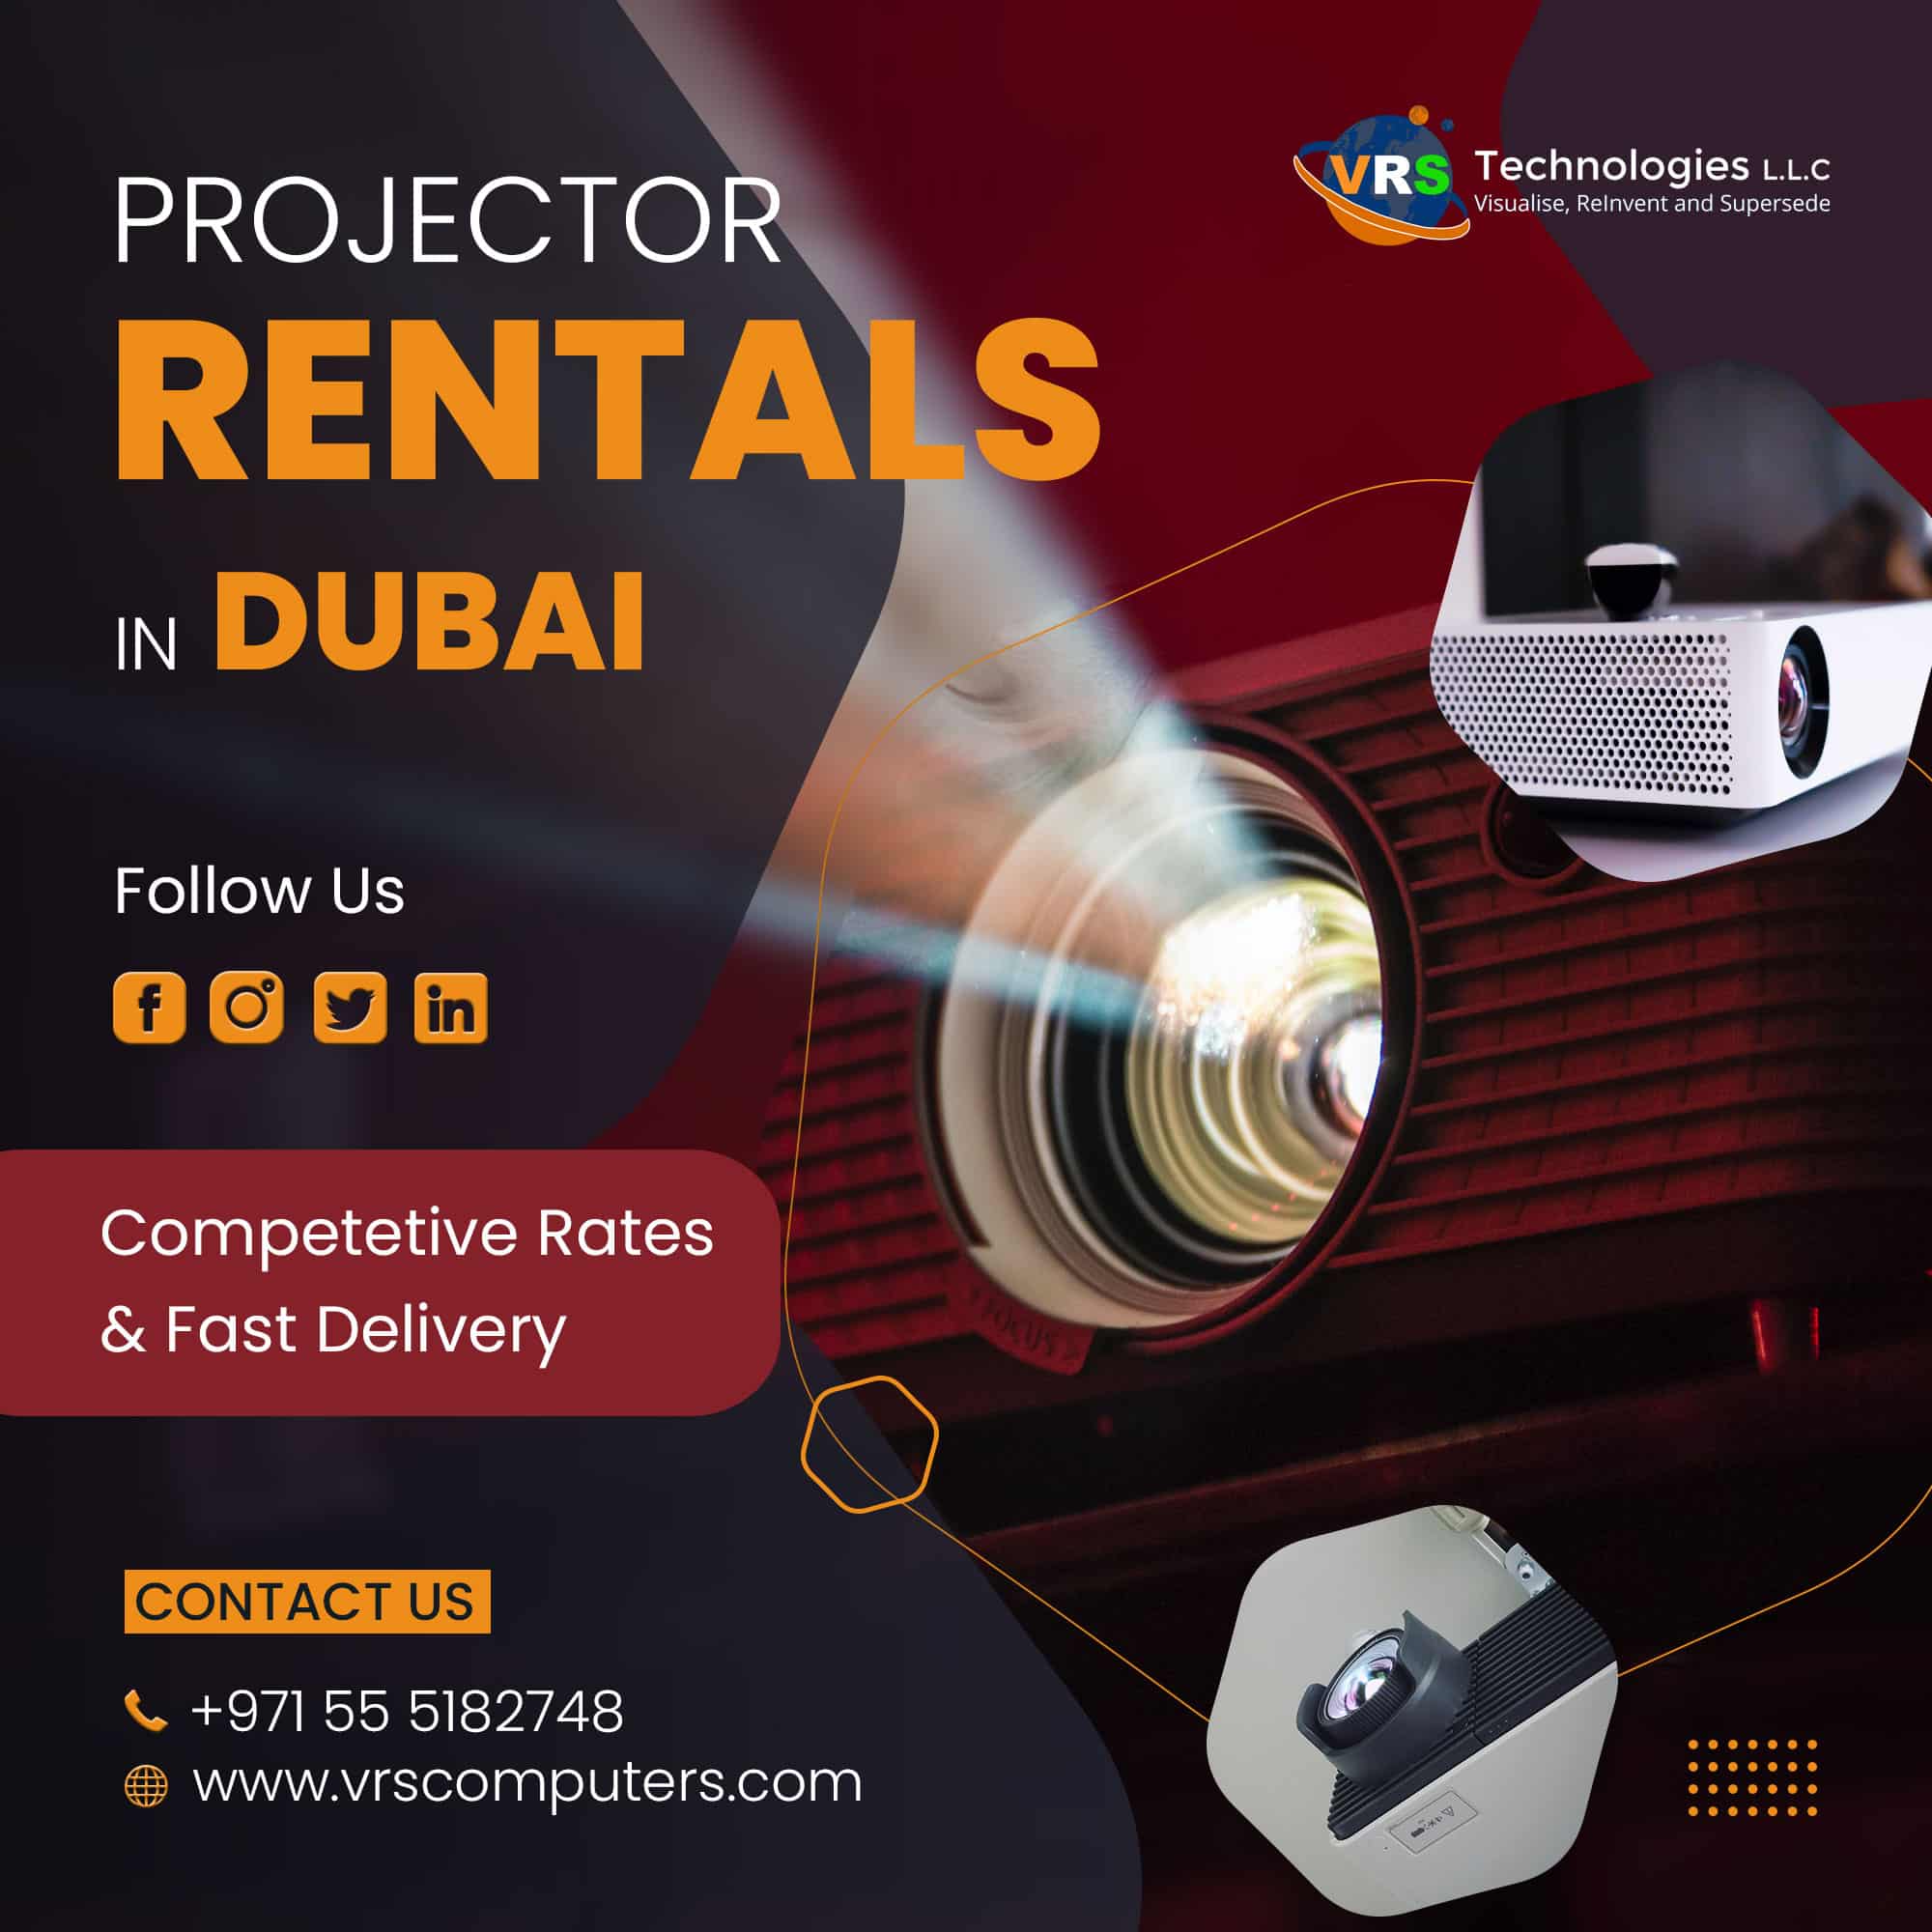 Can Renting Projectors In Dubai Affect A Student S Learning Process